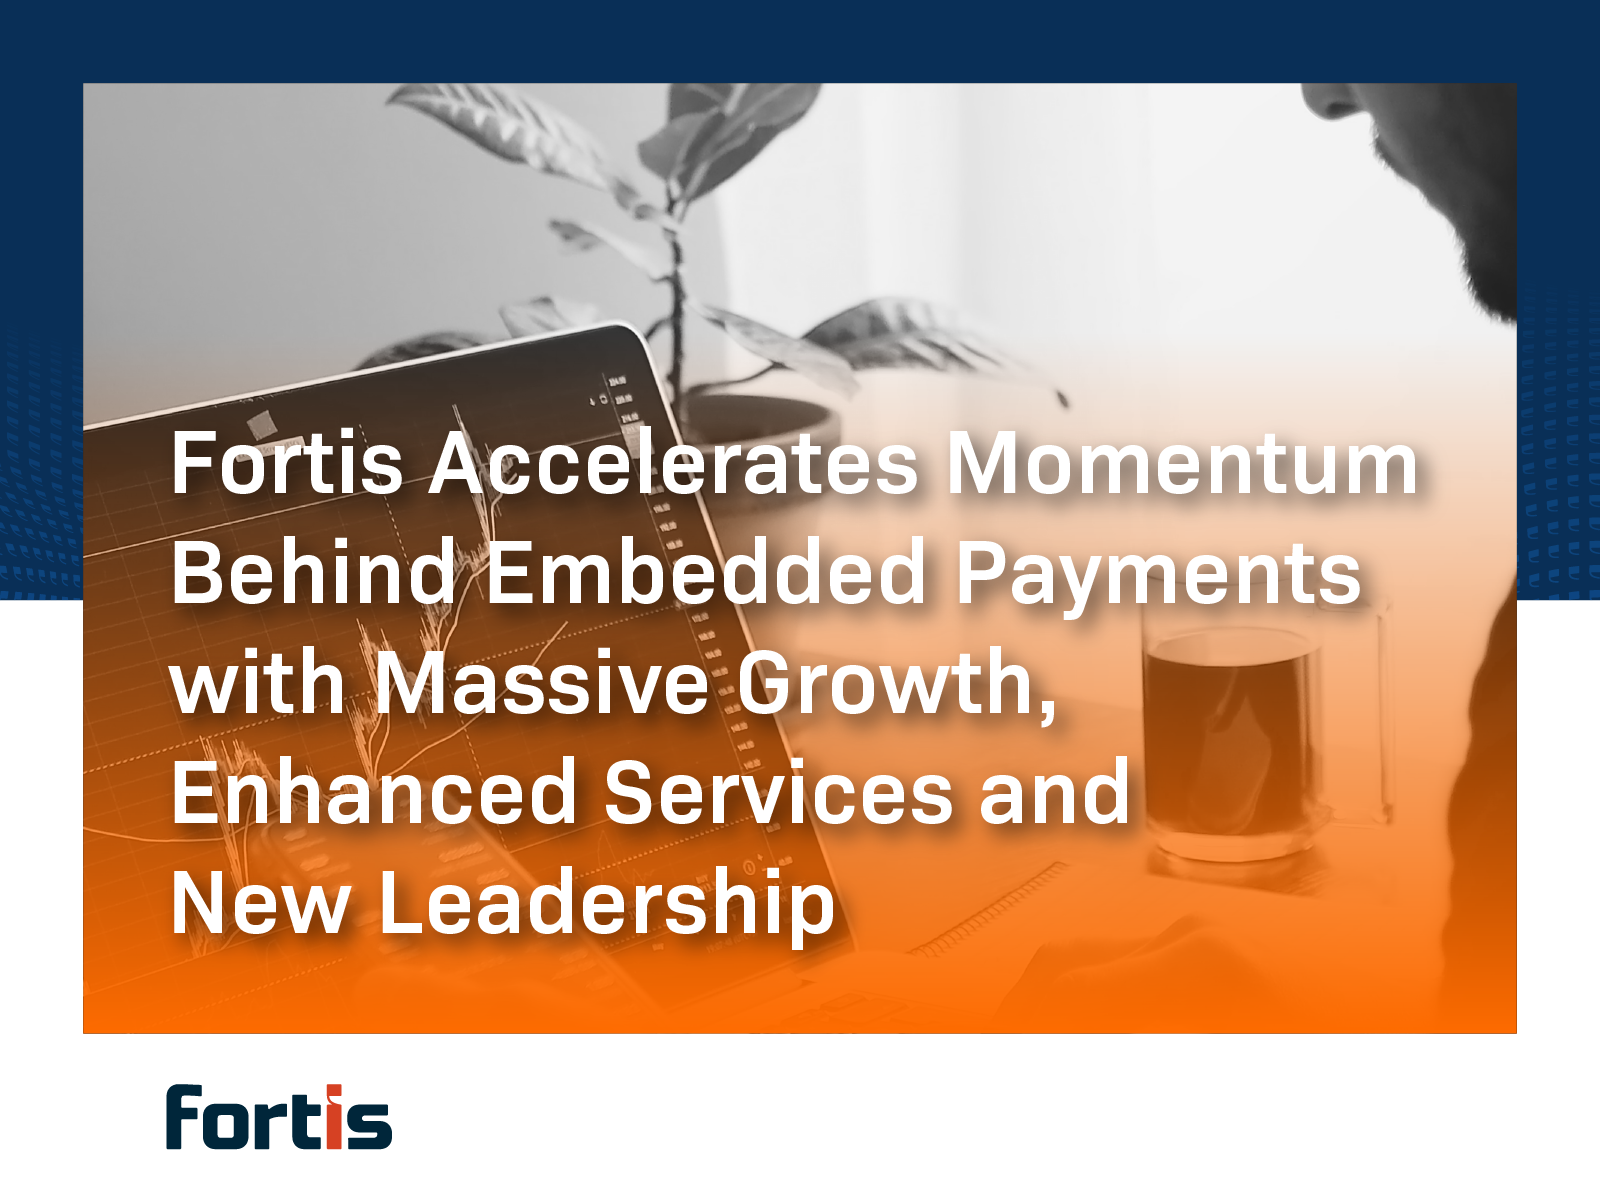 Fortis Accelerates Momentum Behind Embedded Payments with Massive Growth, Enhanced Services and New Leadership - Featured Image